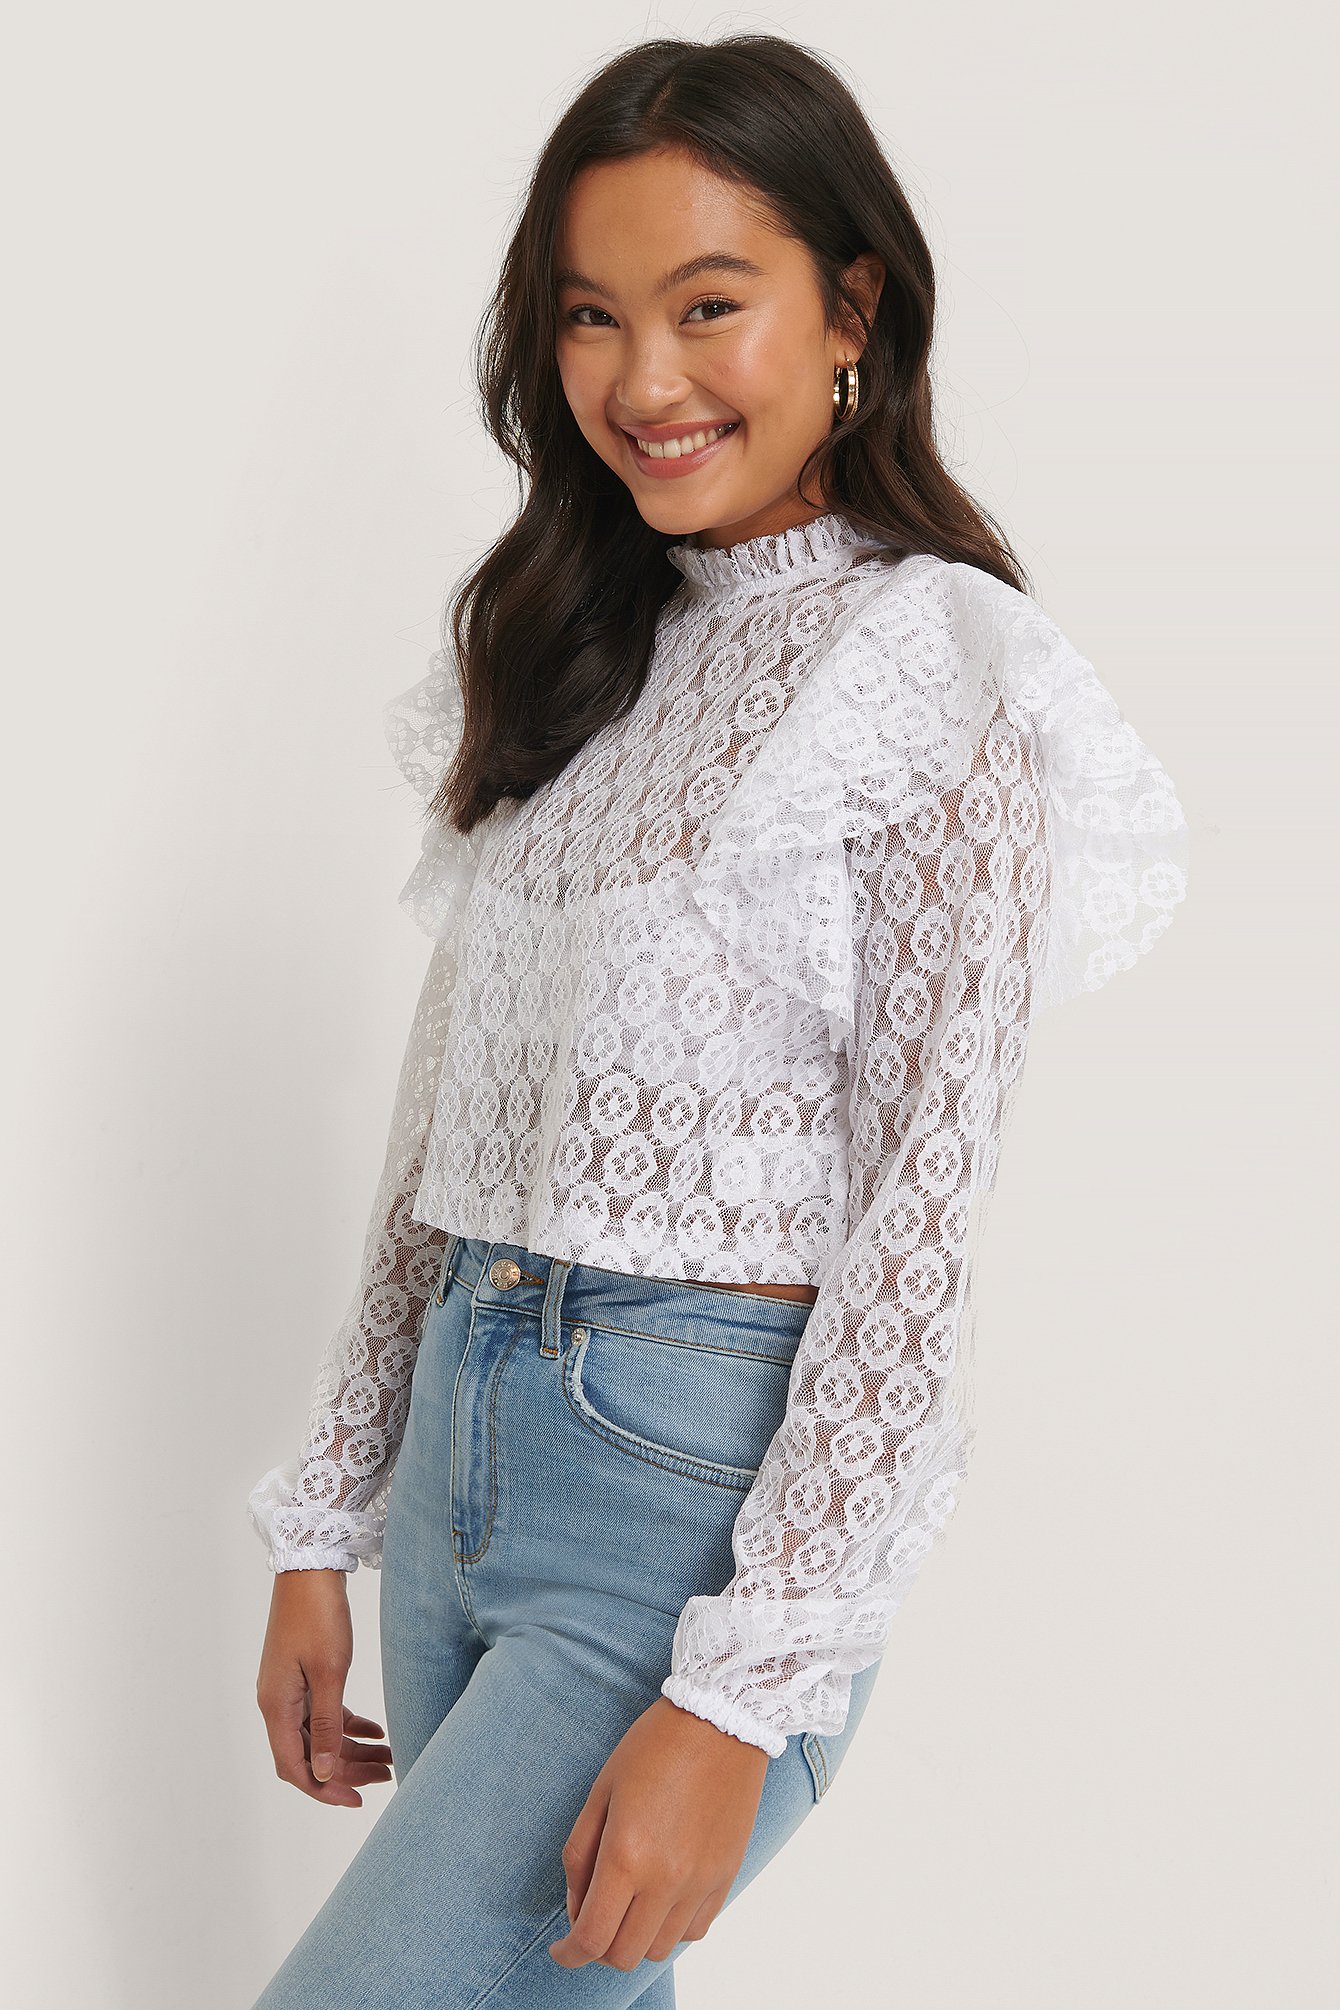 White Lace Frill Top